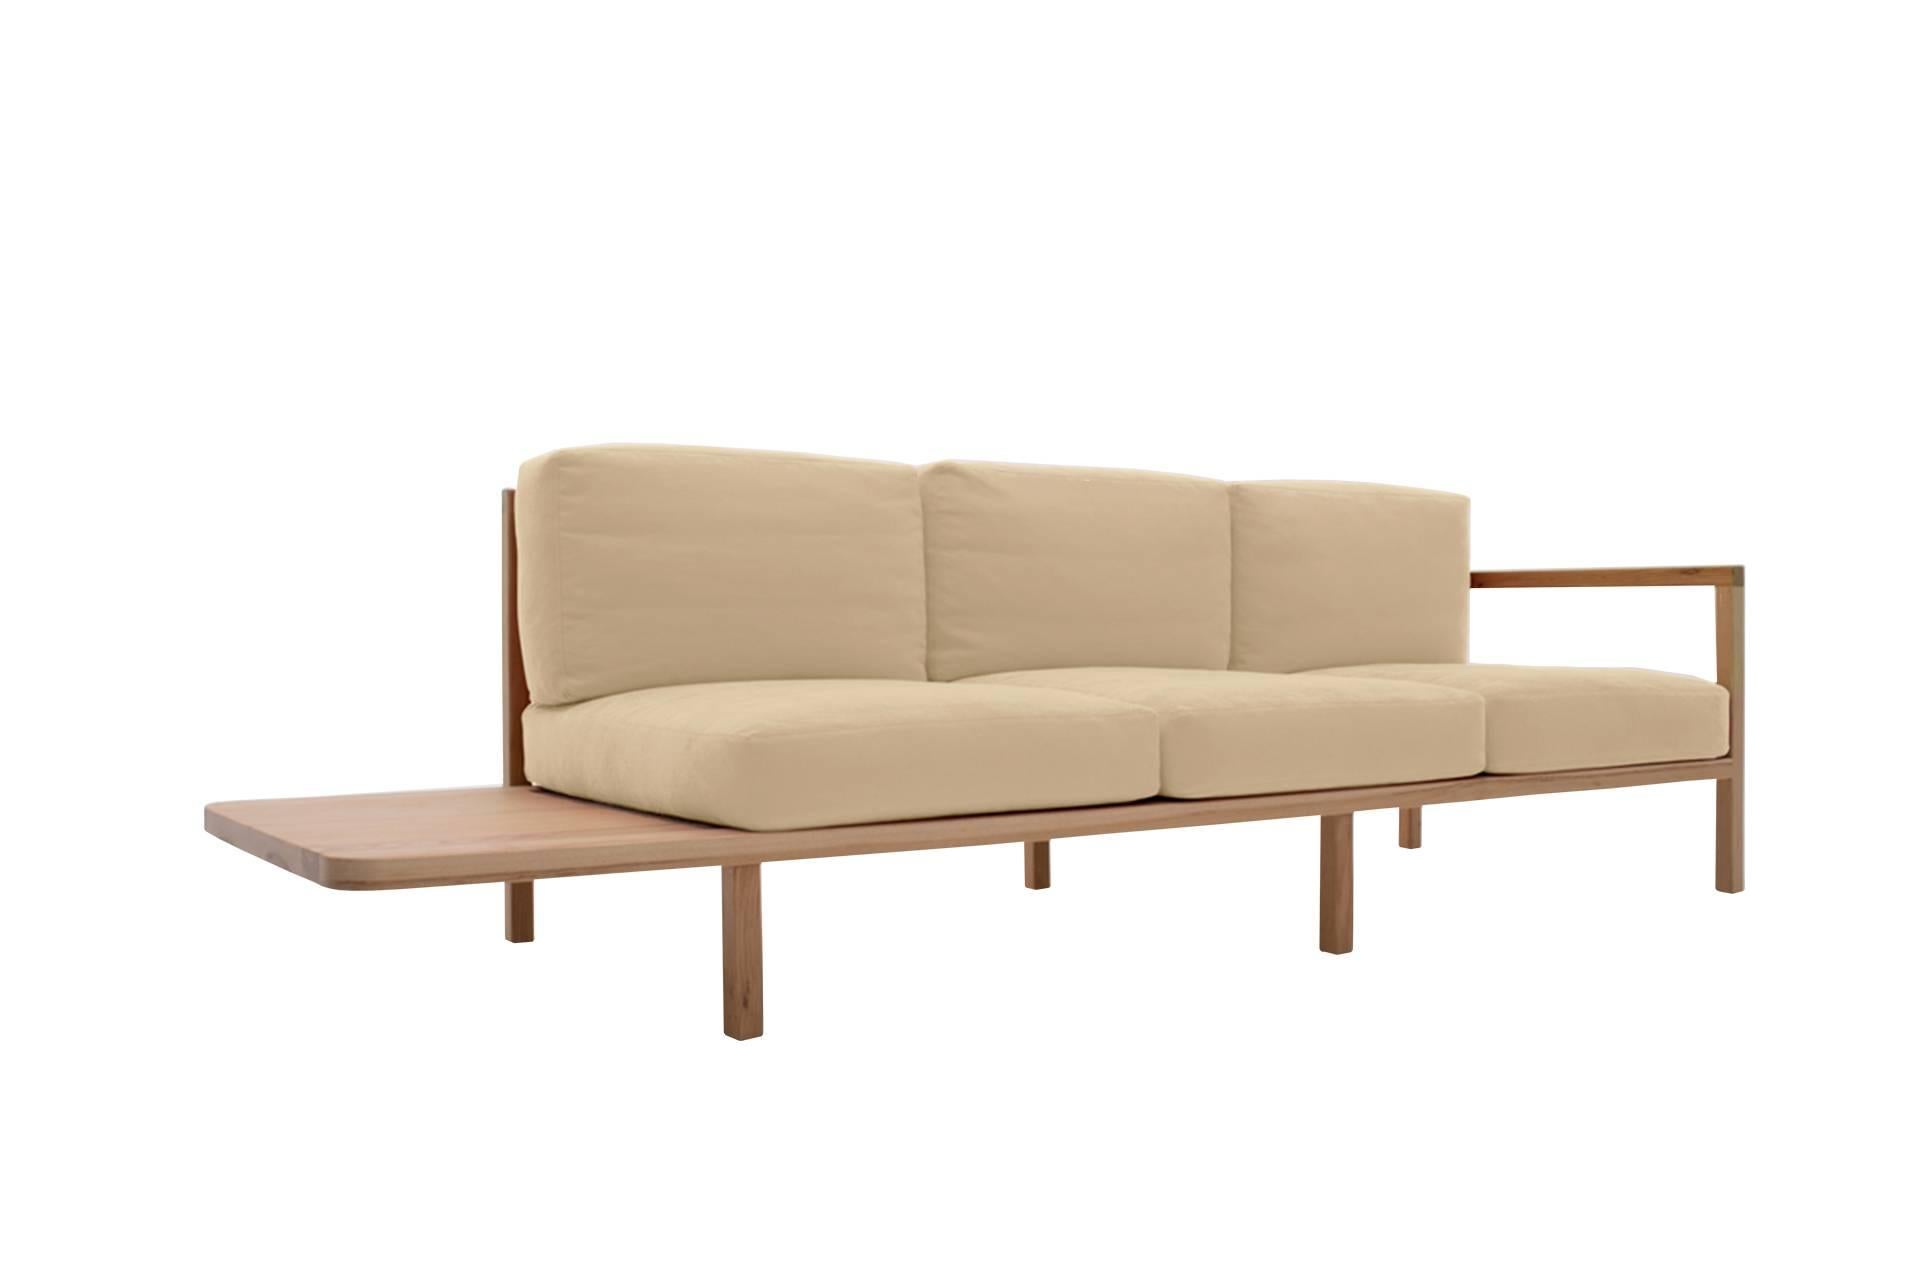 Our Venice sofa takes style cues from both Mid-Century Modern and the California coast. Minimal and elegant, each material is carefully selected, from the Italian linen and hickory frame to the webbing and down-and-feather-fill. Its asymmetrical